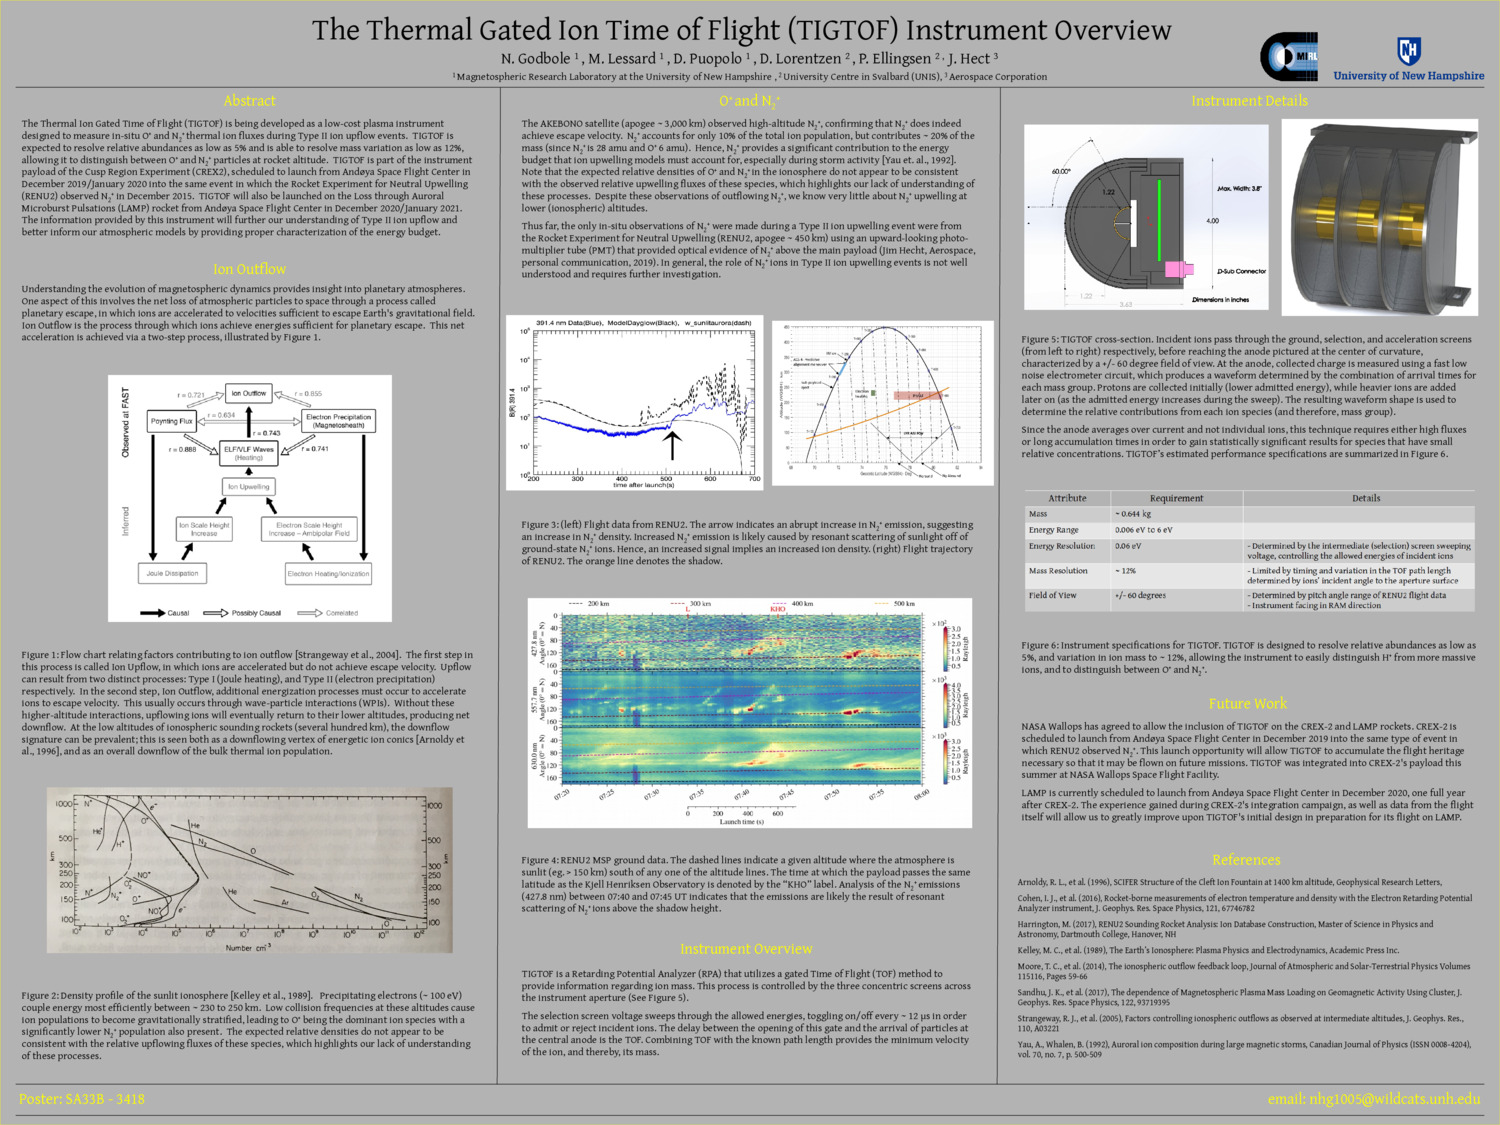 The Thermal Ion Gated Time Of Flight (Tigtof) Instrument Overview by nhg1005